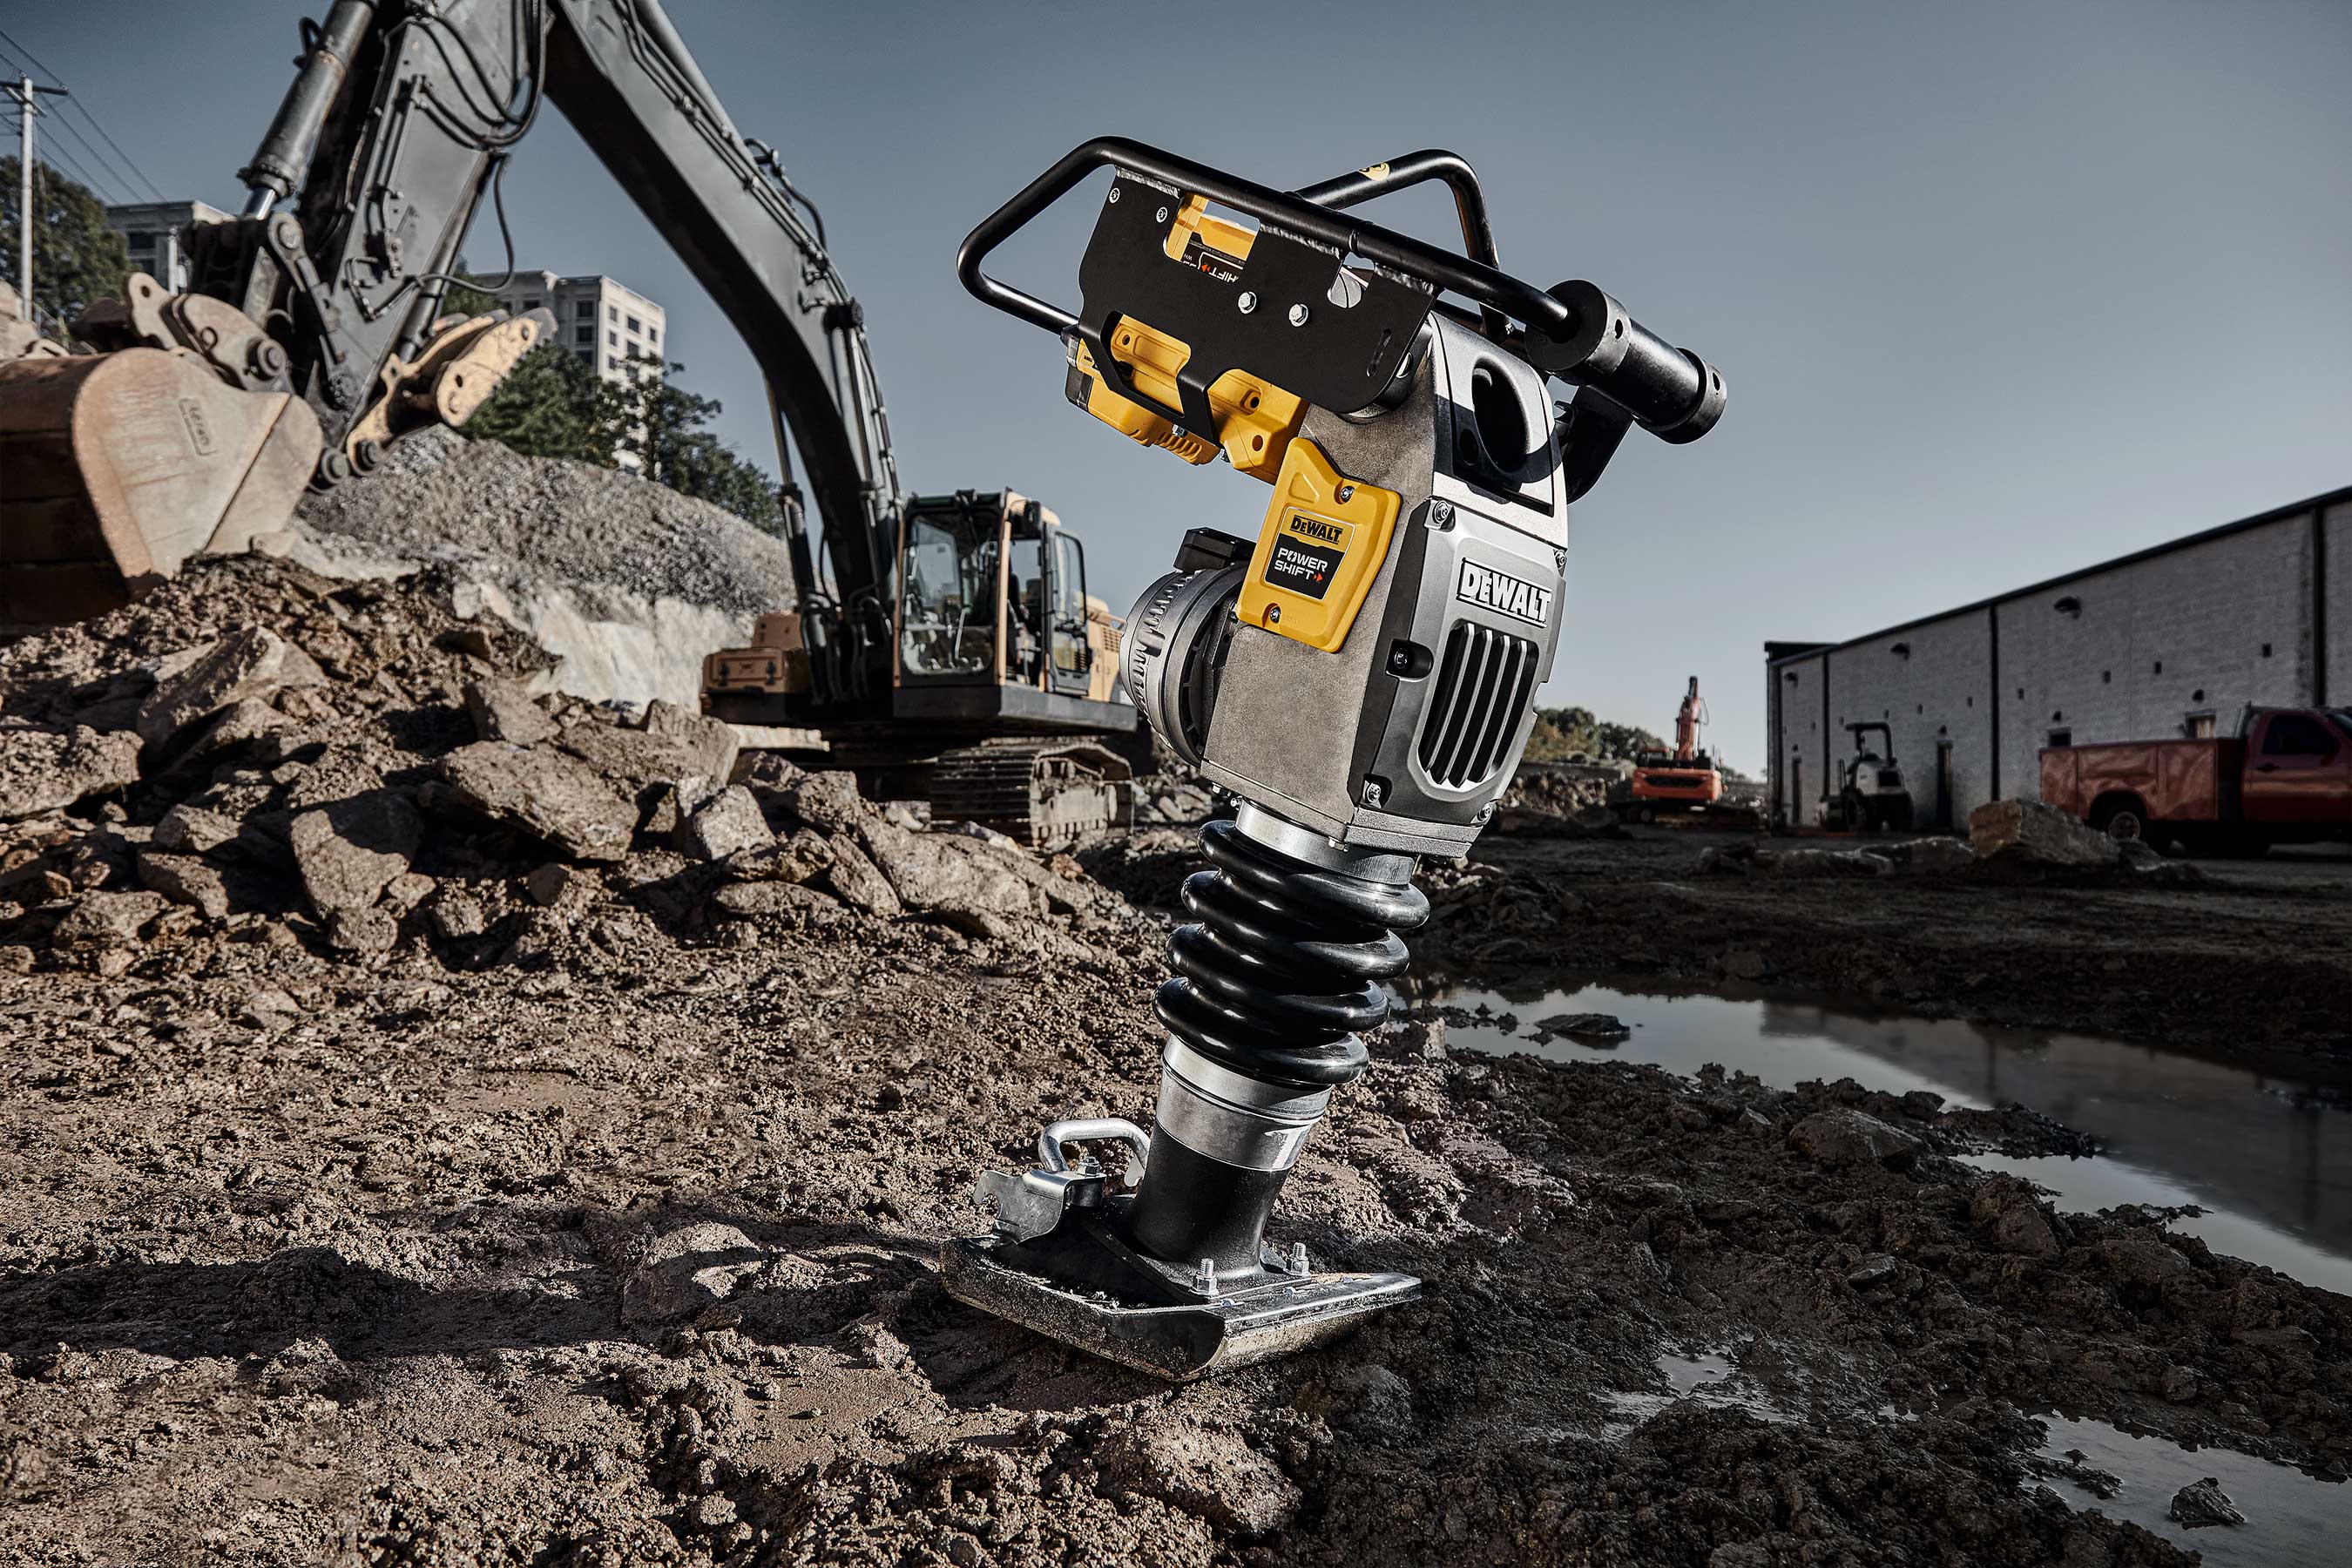 The DEWALT POWERSHIFT™ Rammer features 2,660 ft. lbs. of impact force with antivibration insulators and mounted controls on the ergonomic two-position handle.